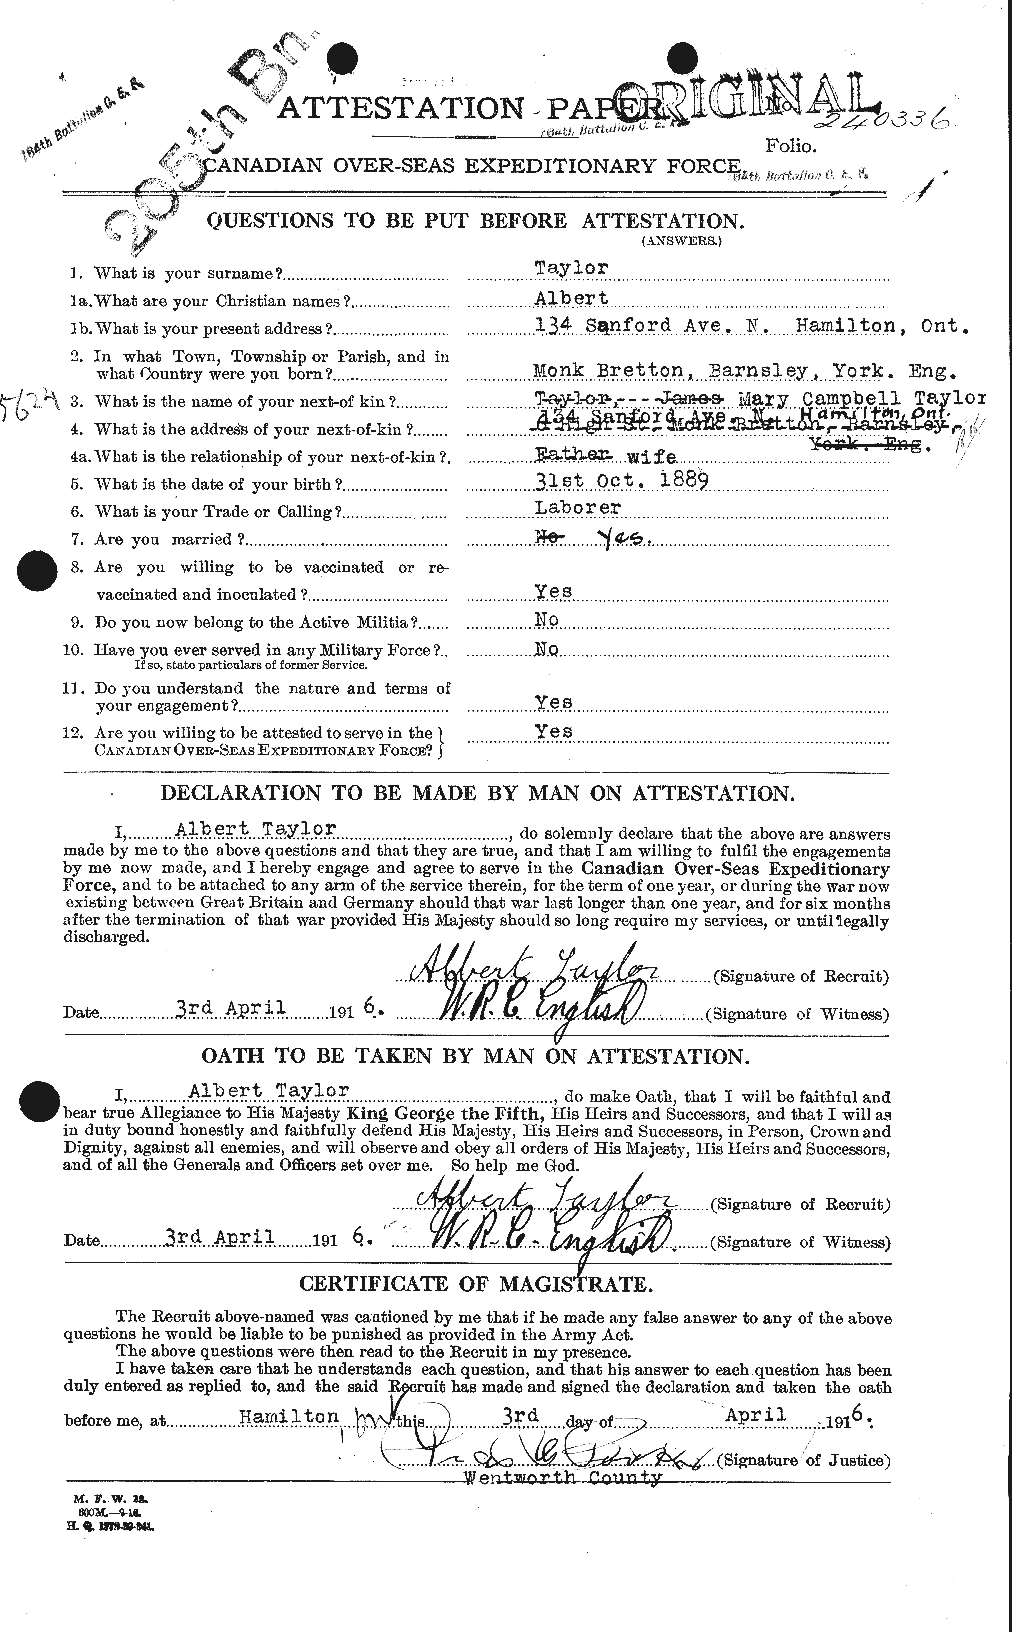 Personnel Records of the First World War - CEF 626104a